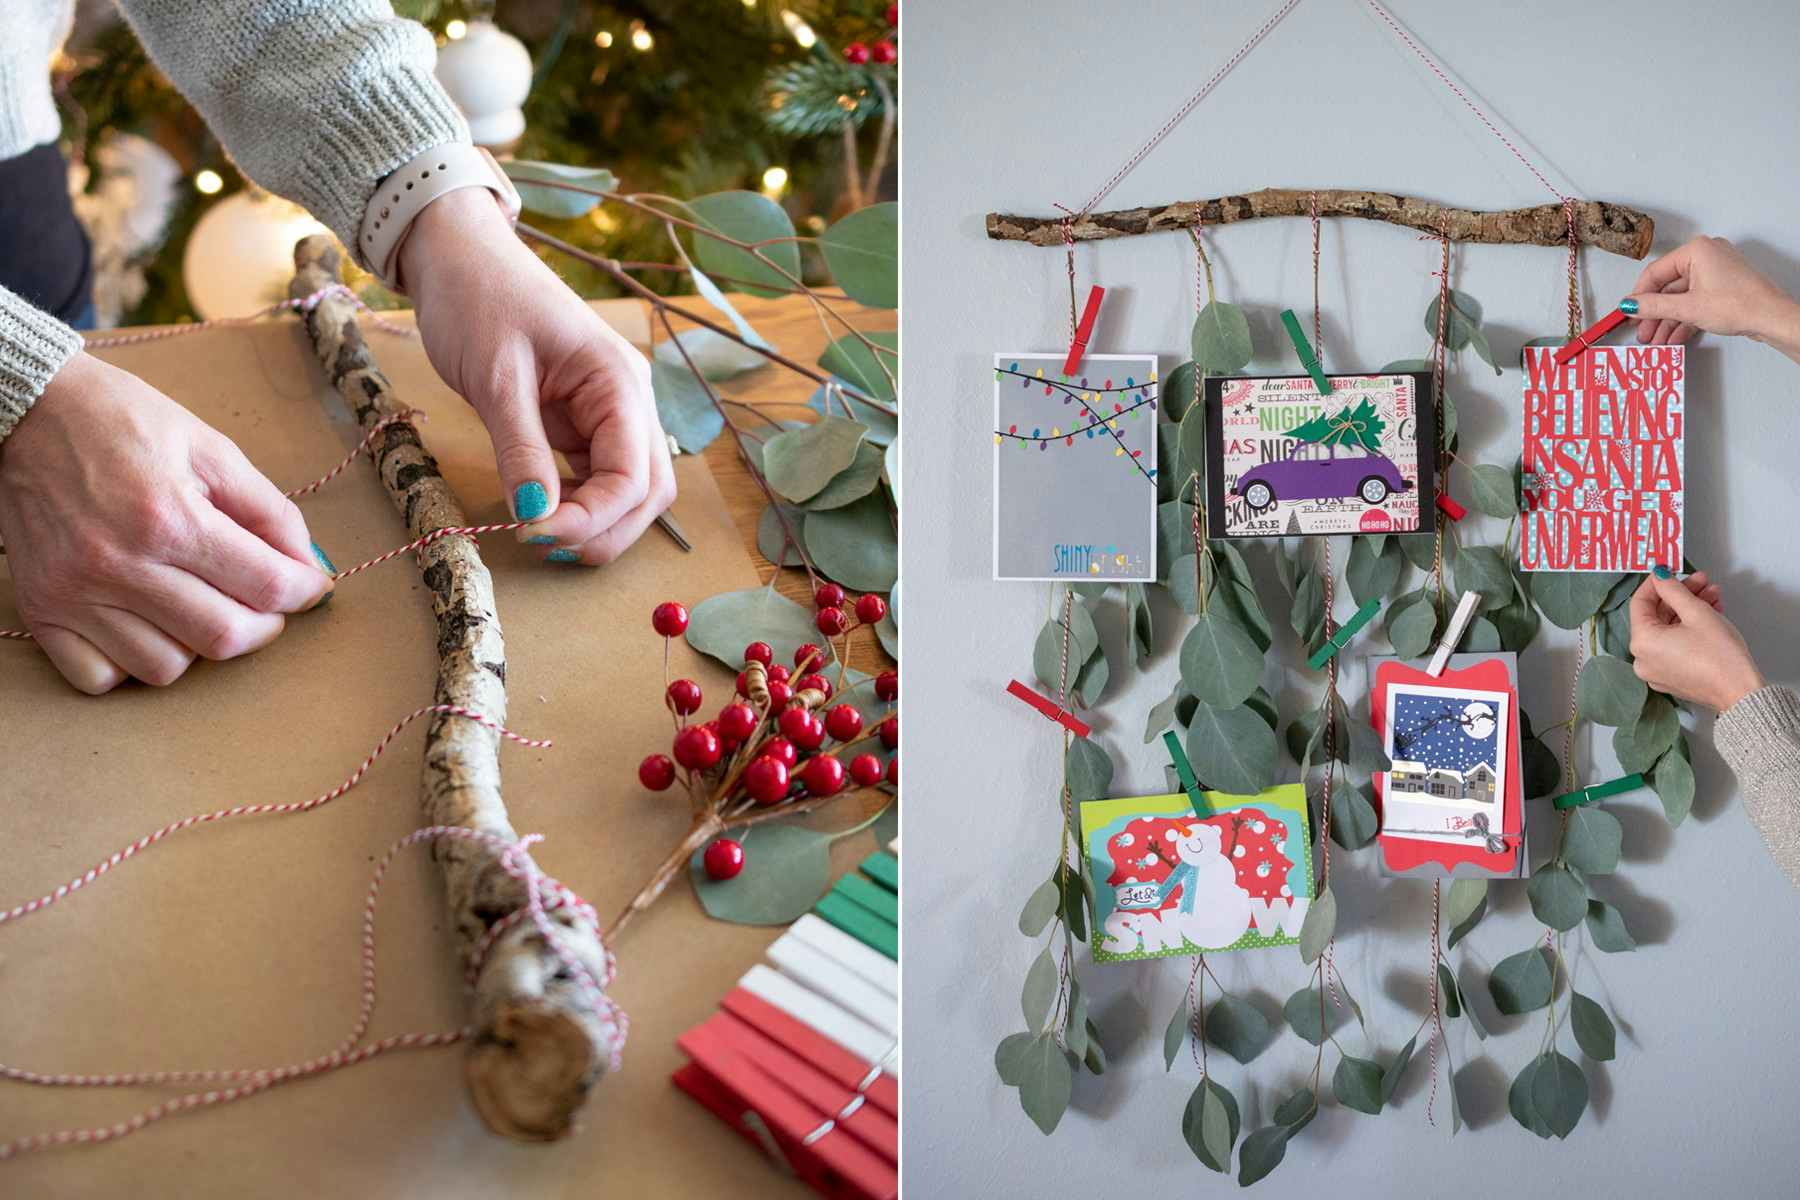 A person attaching string, greenery, and Christmas cards with colorful clothes pins to a stick.